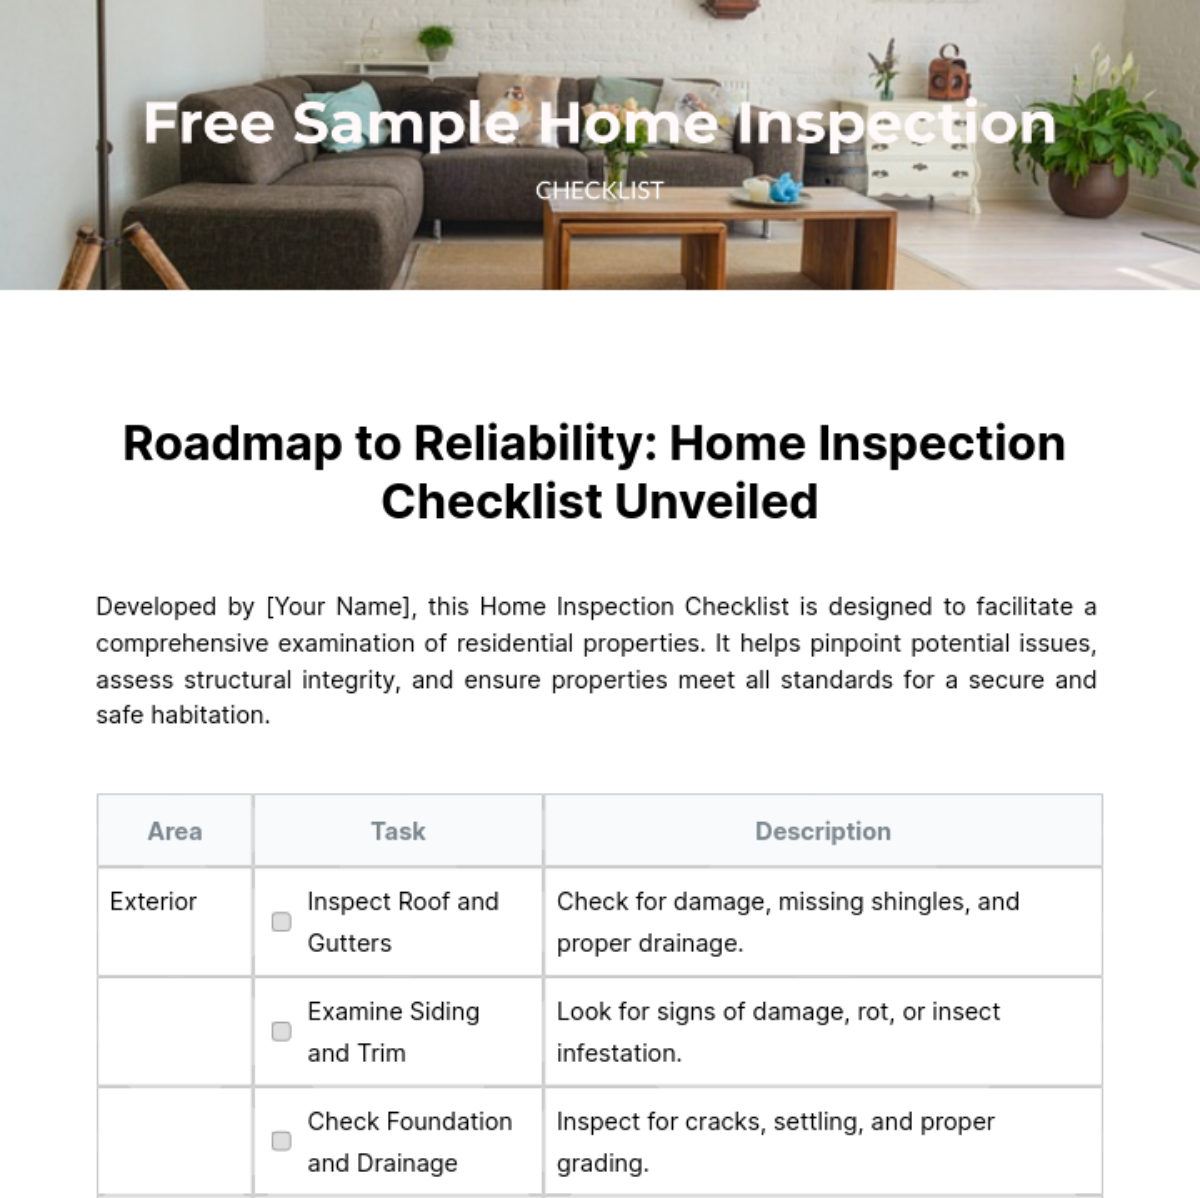 Free Sample Home Inspection Checklist Template